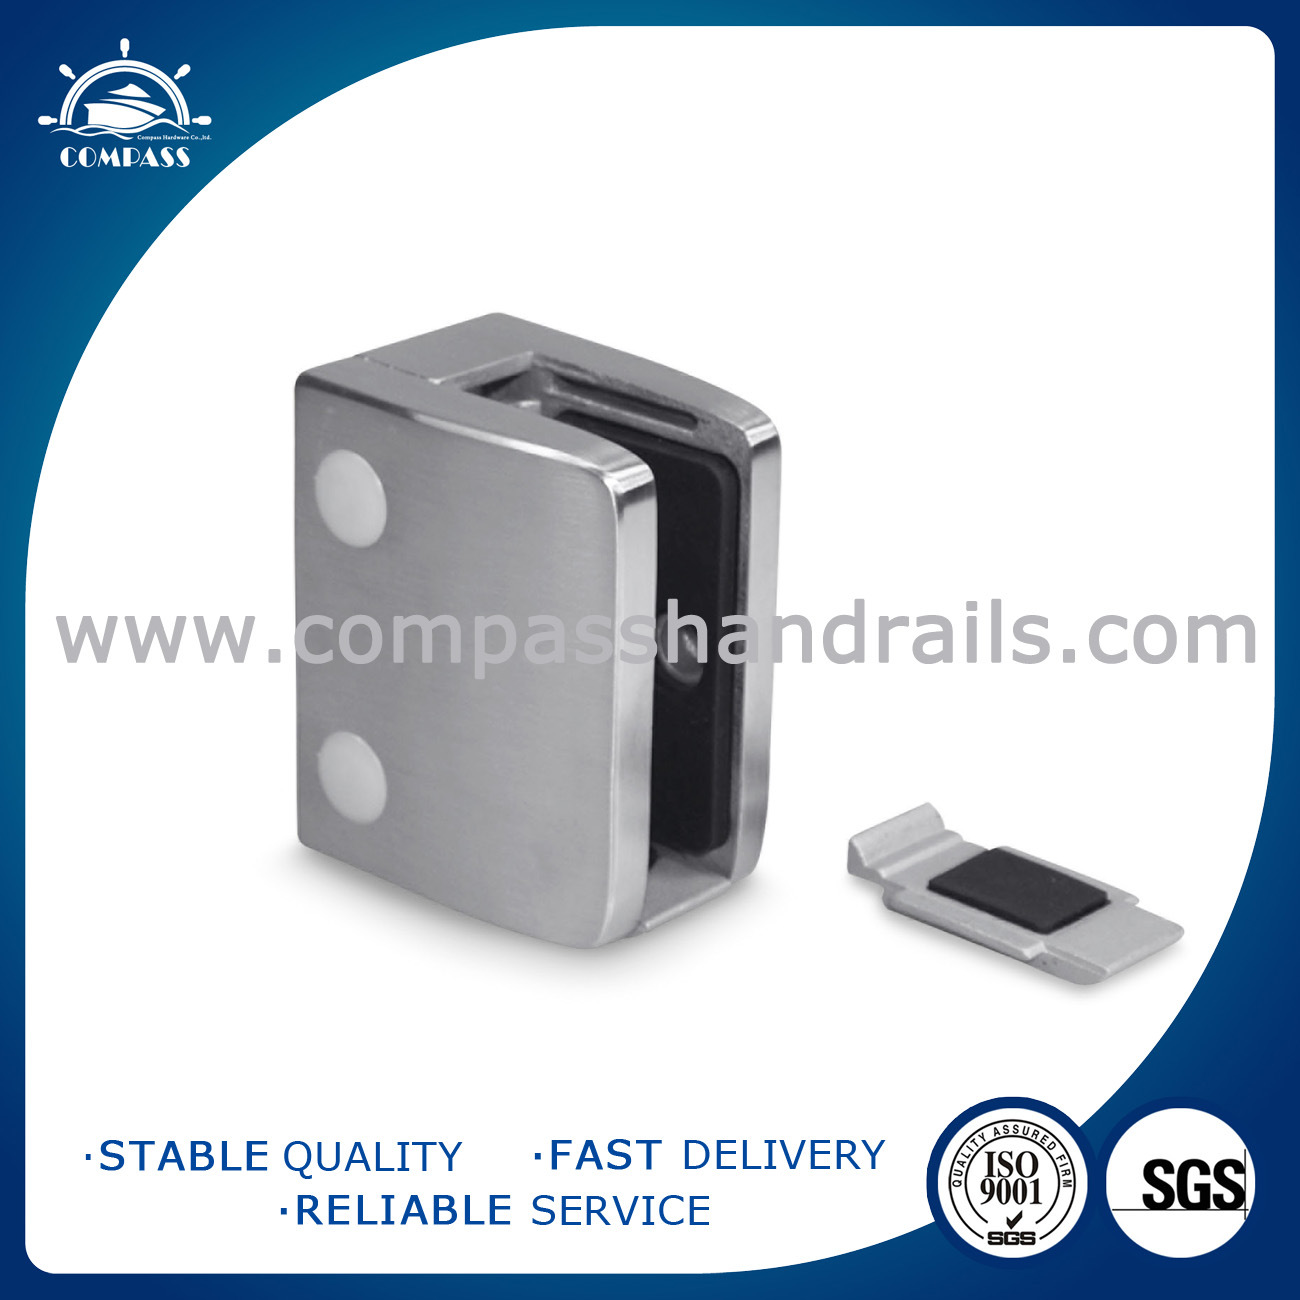 /proimages/2f0j00WtafpTlBuUqd/stainless-steel-square-55*55mm-glass-holder-with-safety-plate.jpg